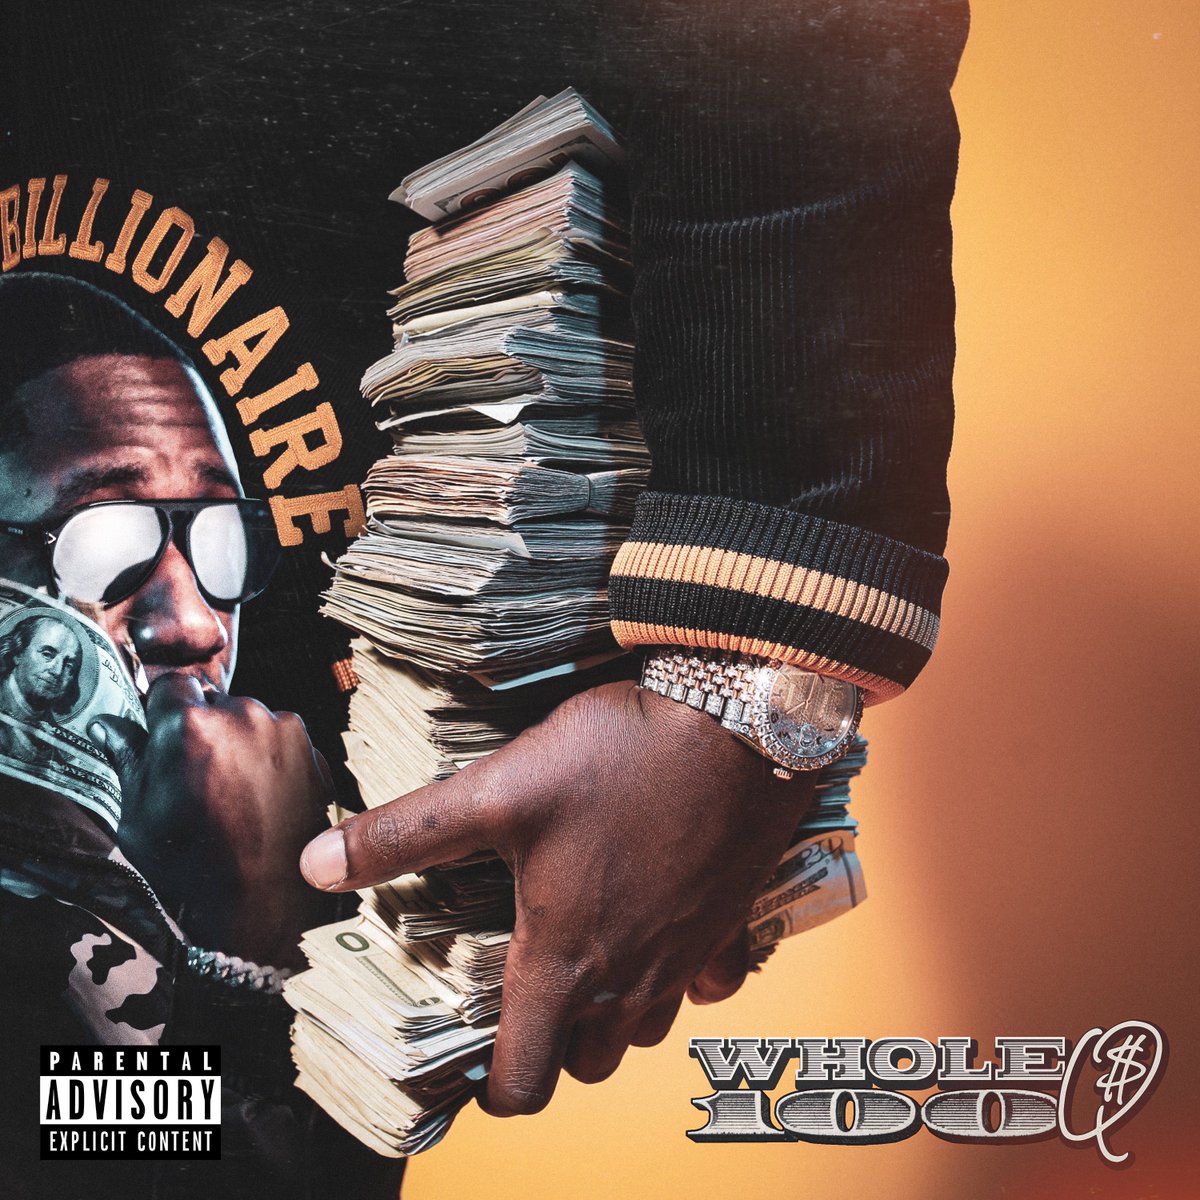 #Whole100 💥 out now! tig.lnk.to/whole100